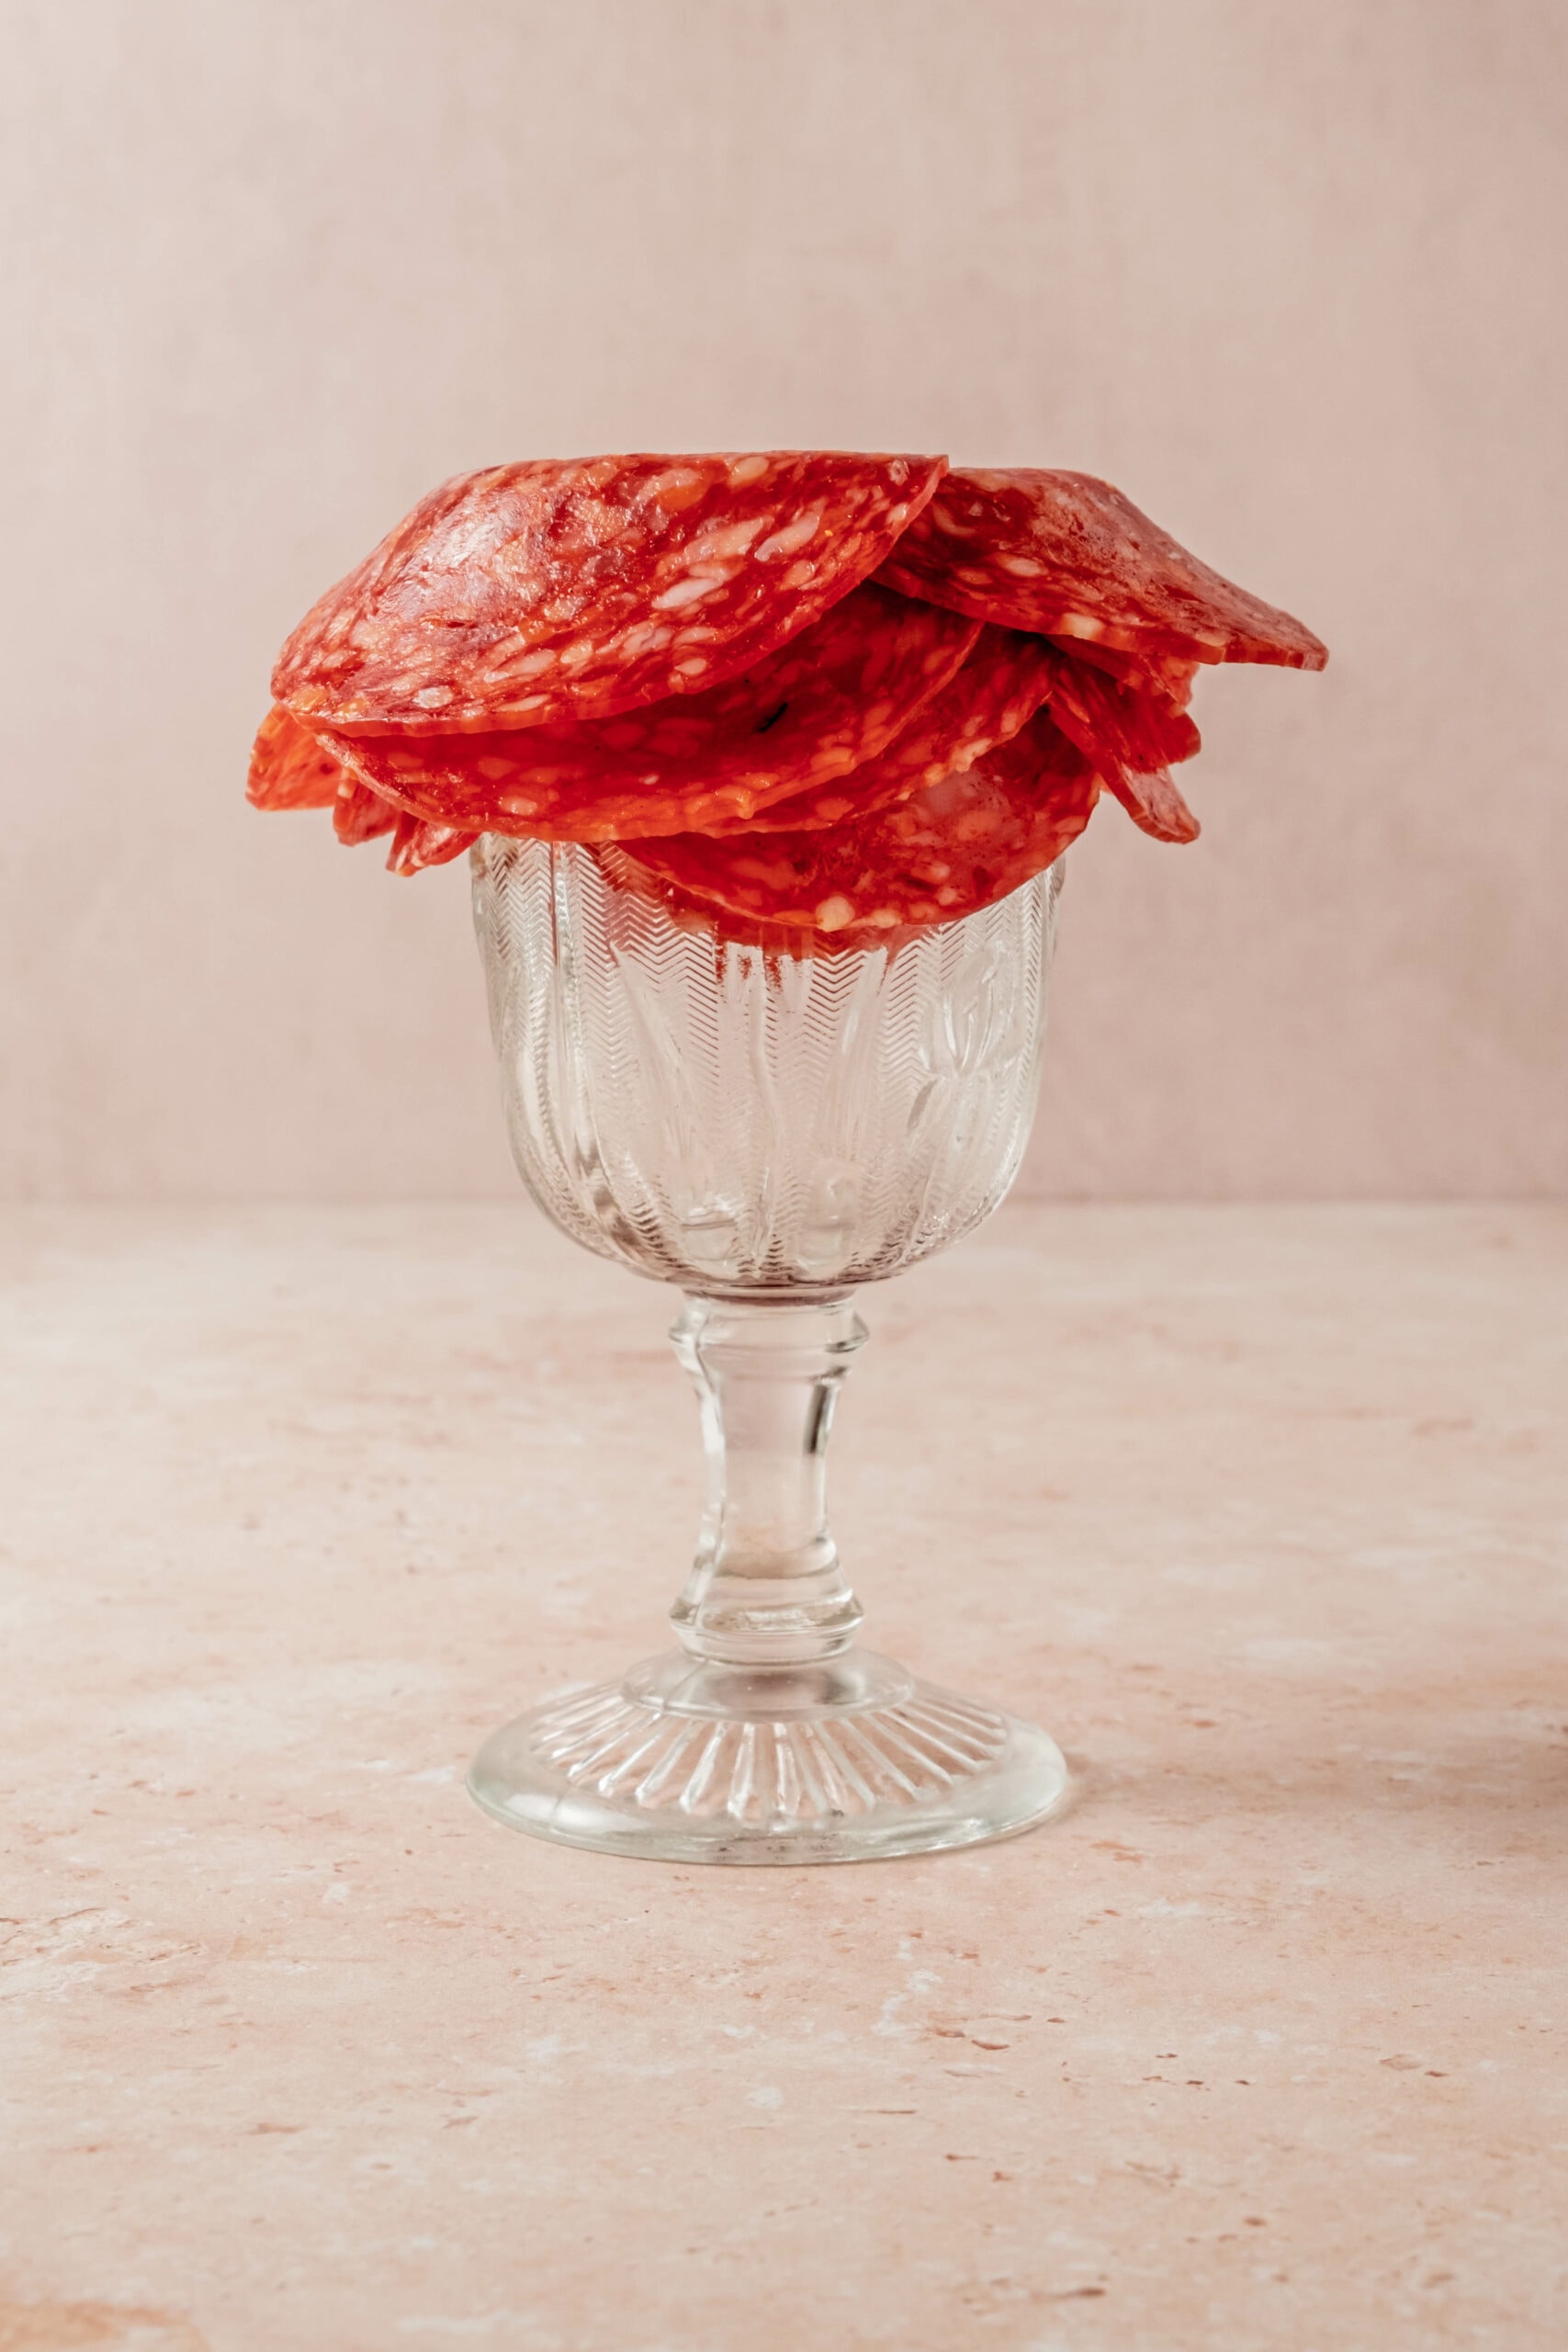 Layering slices of salami on the rim of the glass.